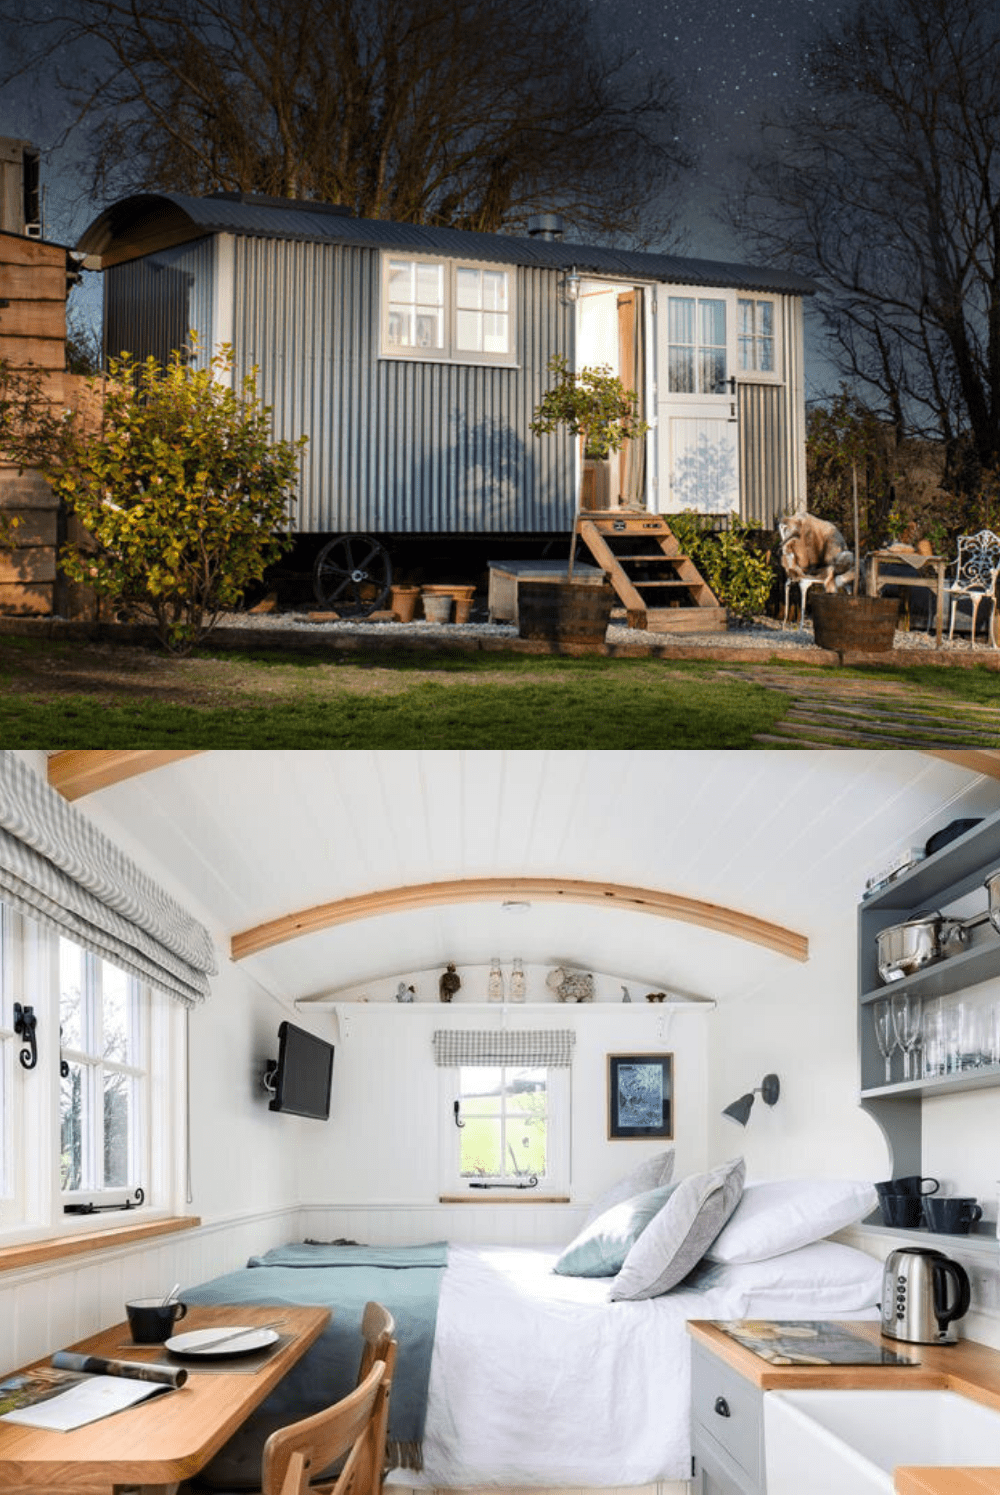 Tiny home by Pumphrey and Weston